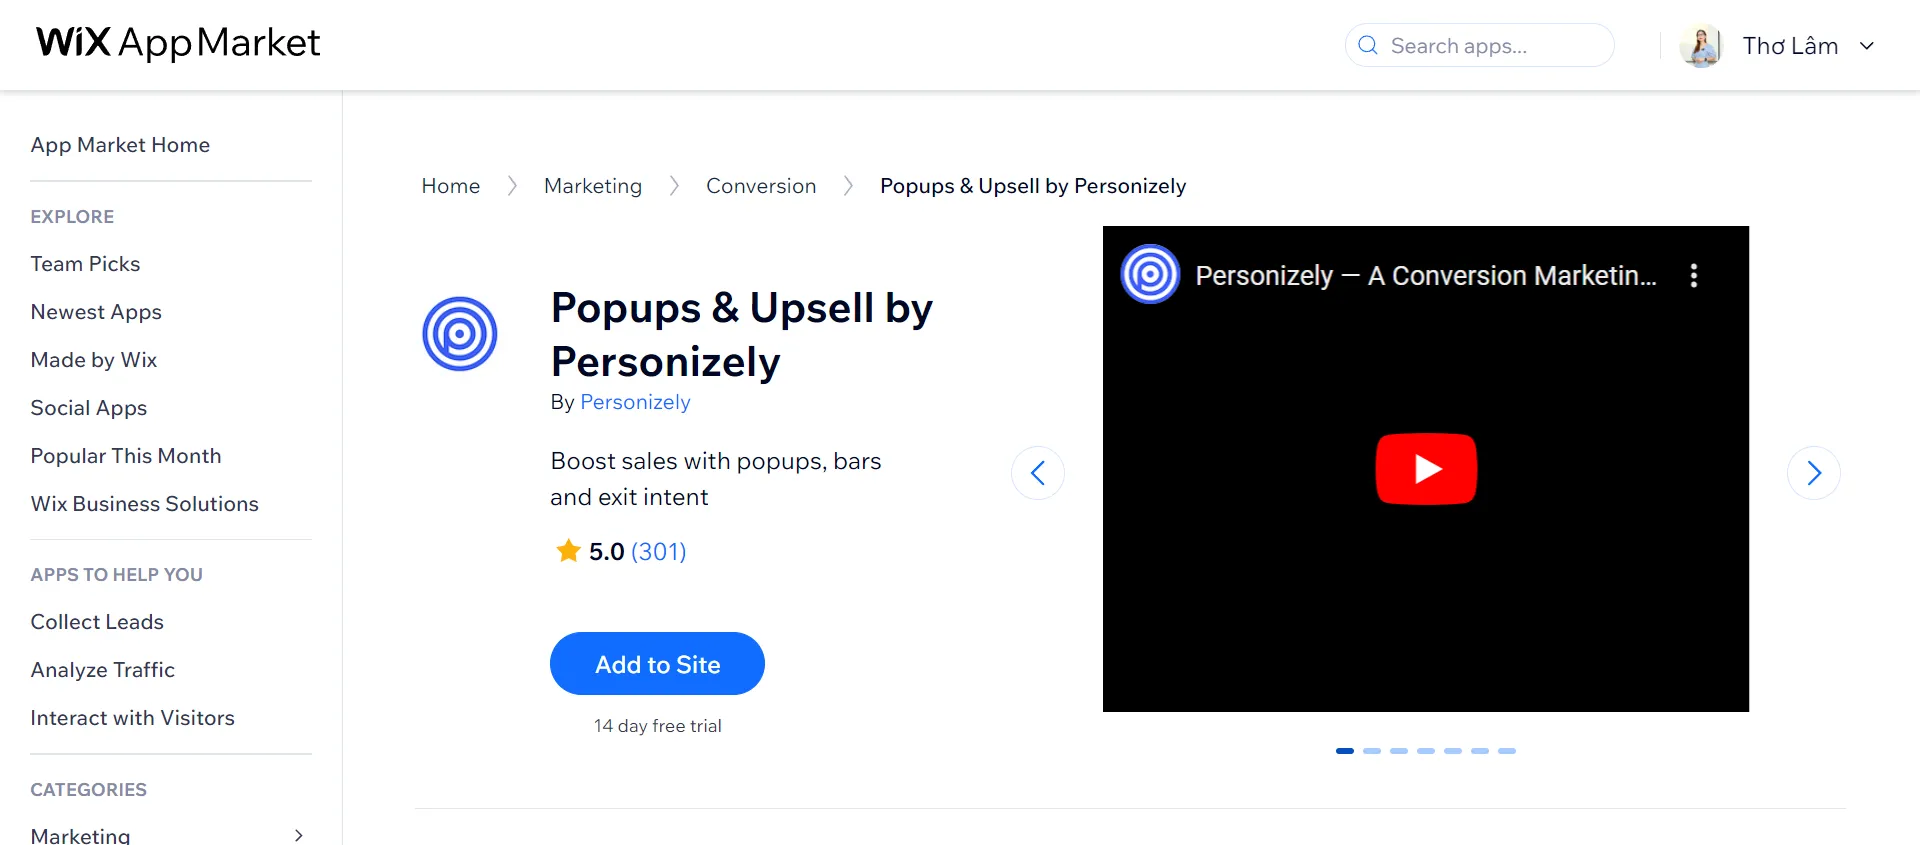 Popups & Upsell by Personizely